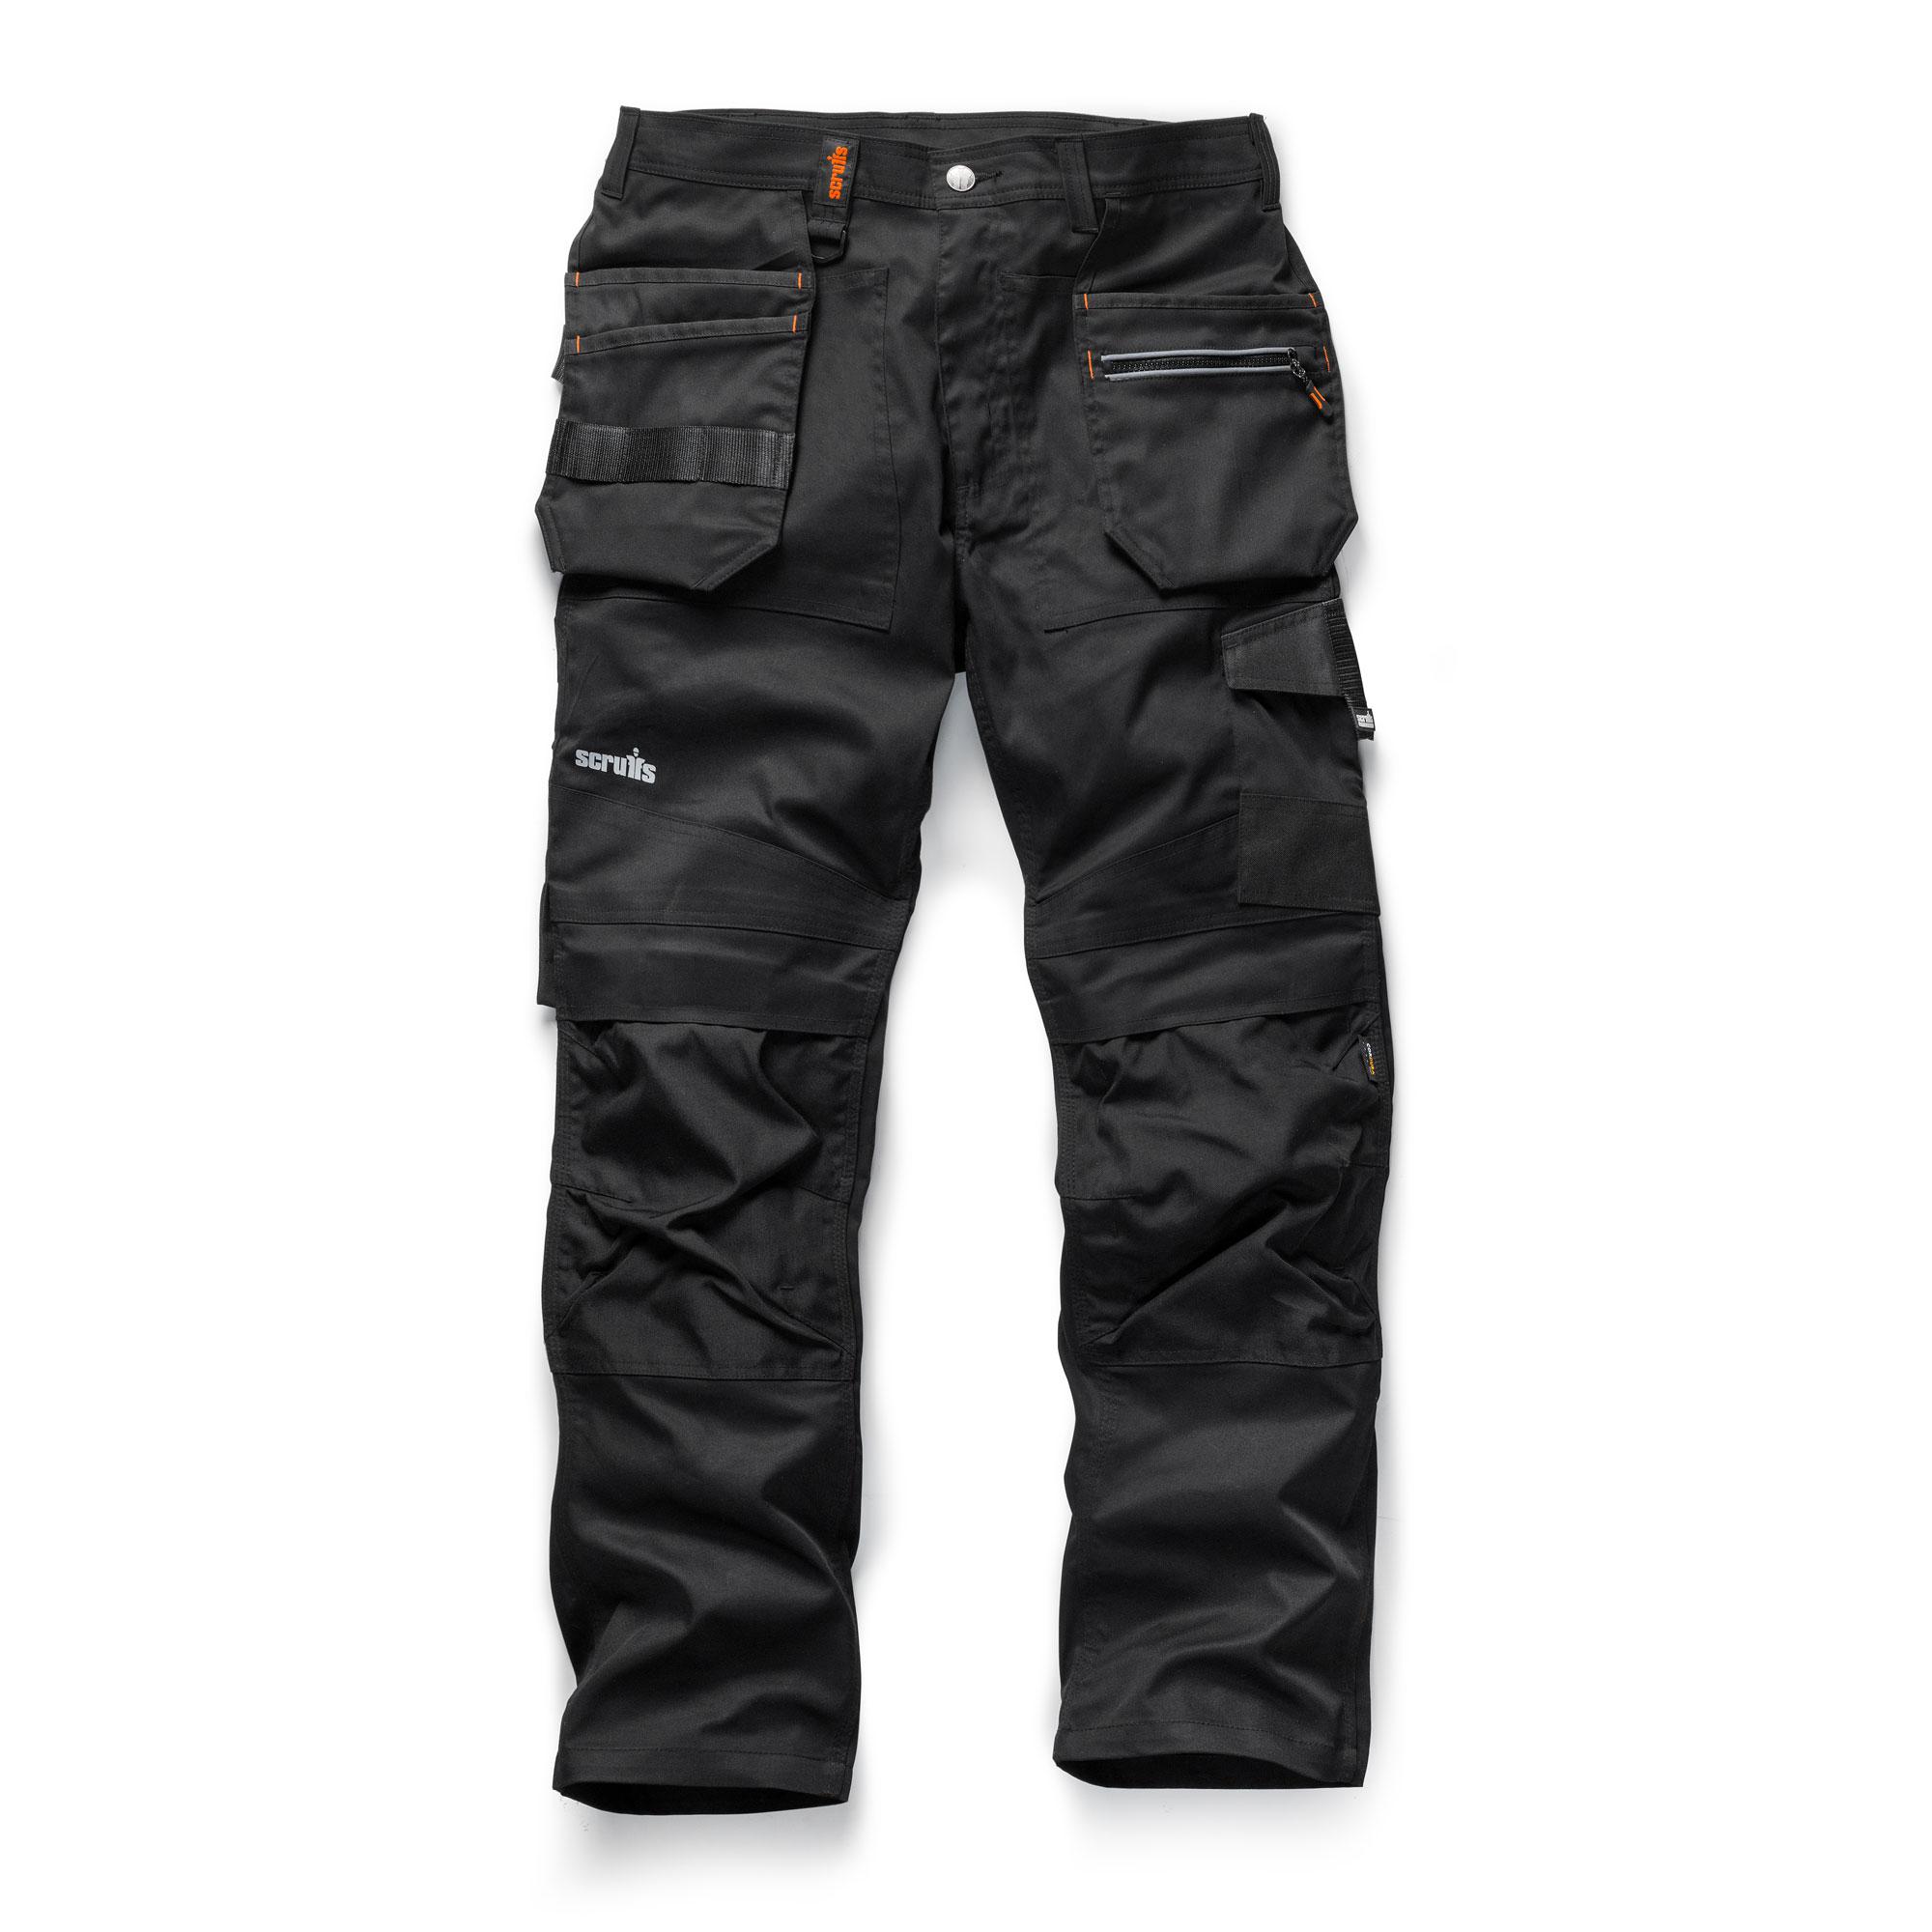 scruffs  worker trousers and shorts twinpack  36w 31l work trousers 